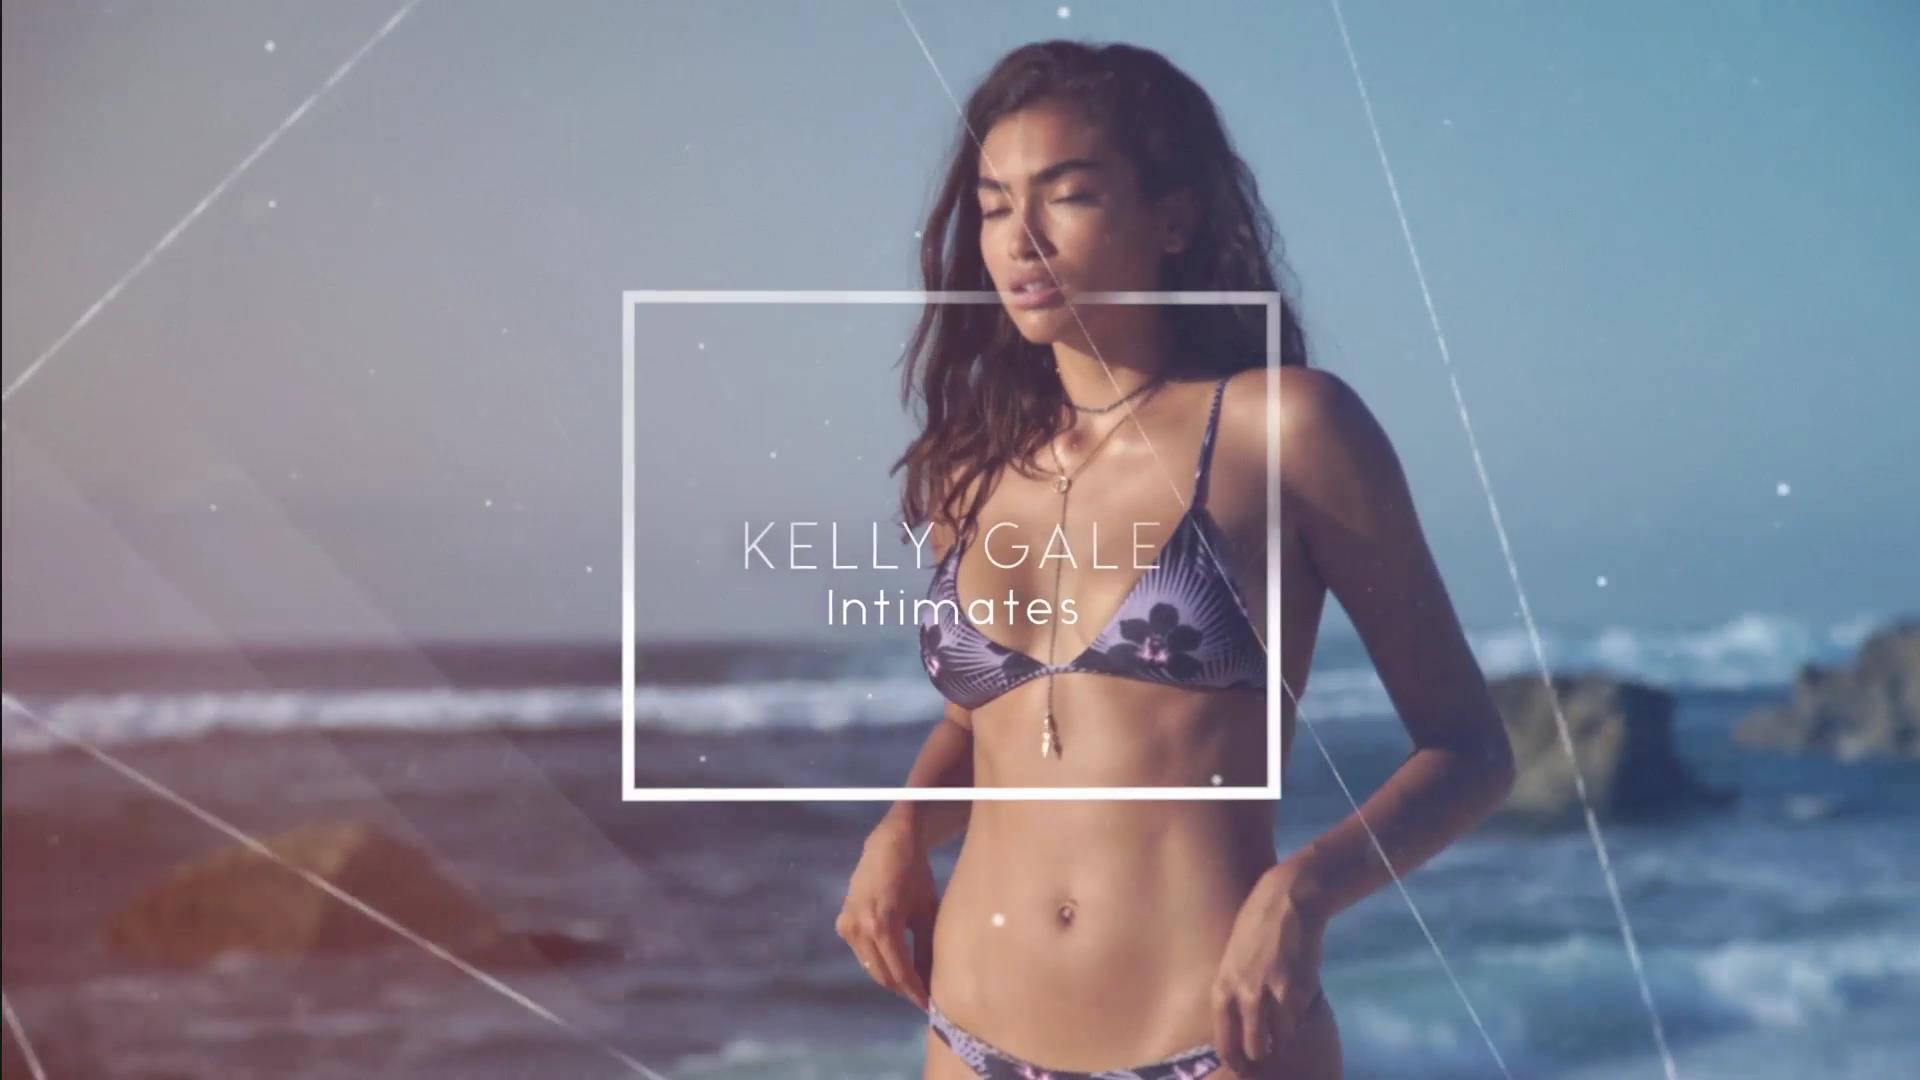 Kelly Gale pussy showing